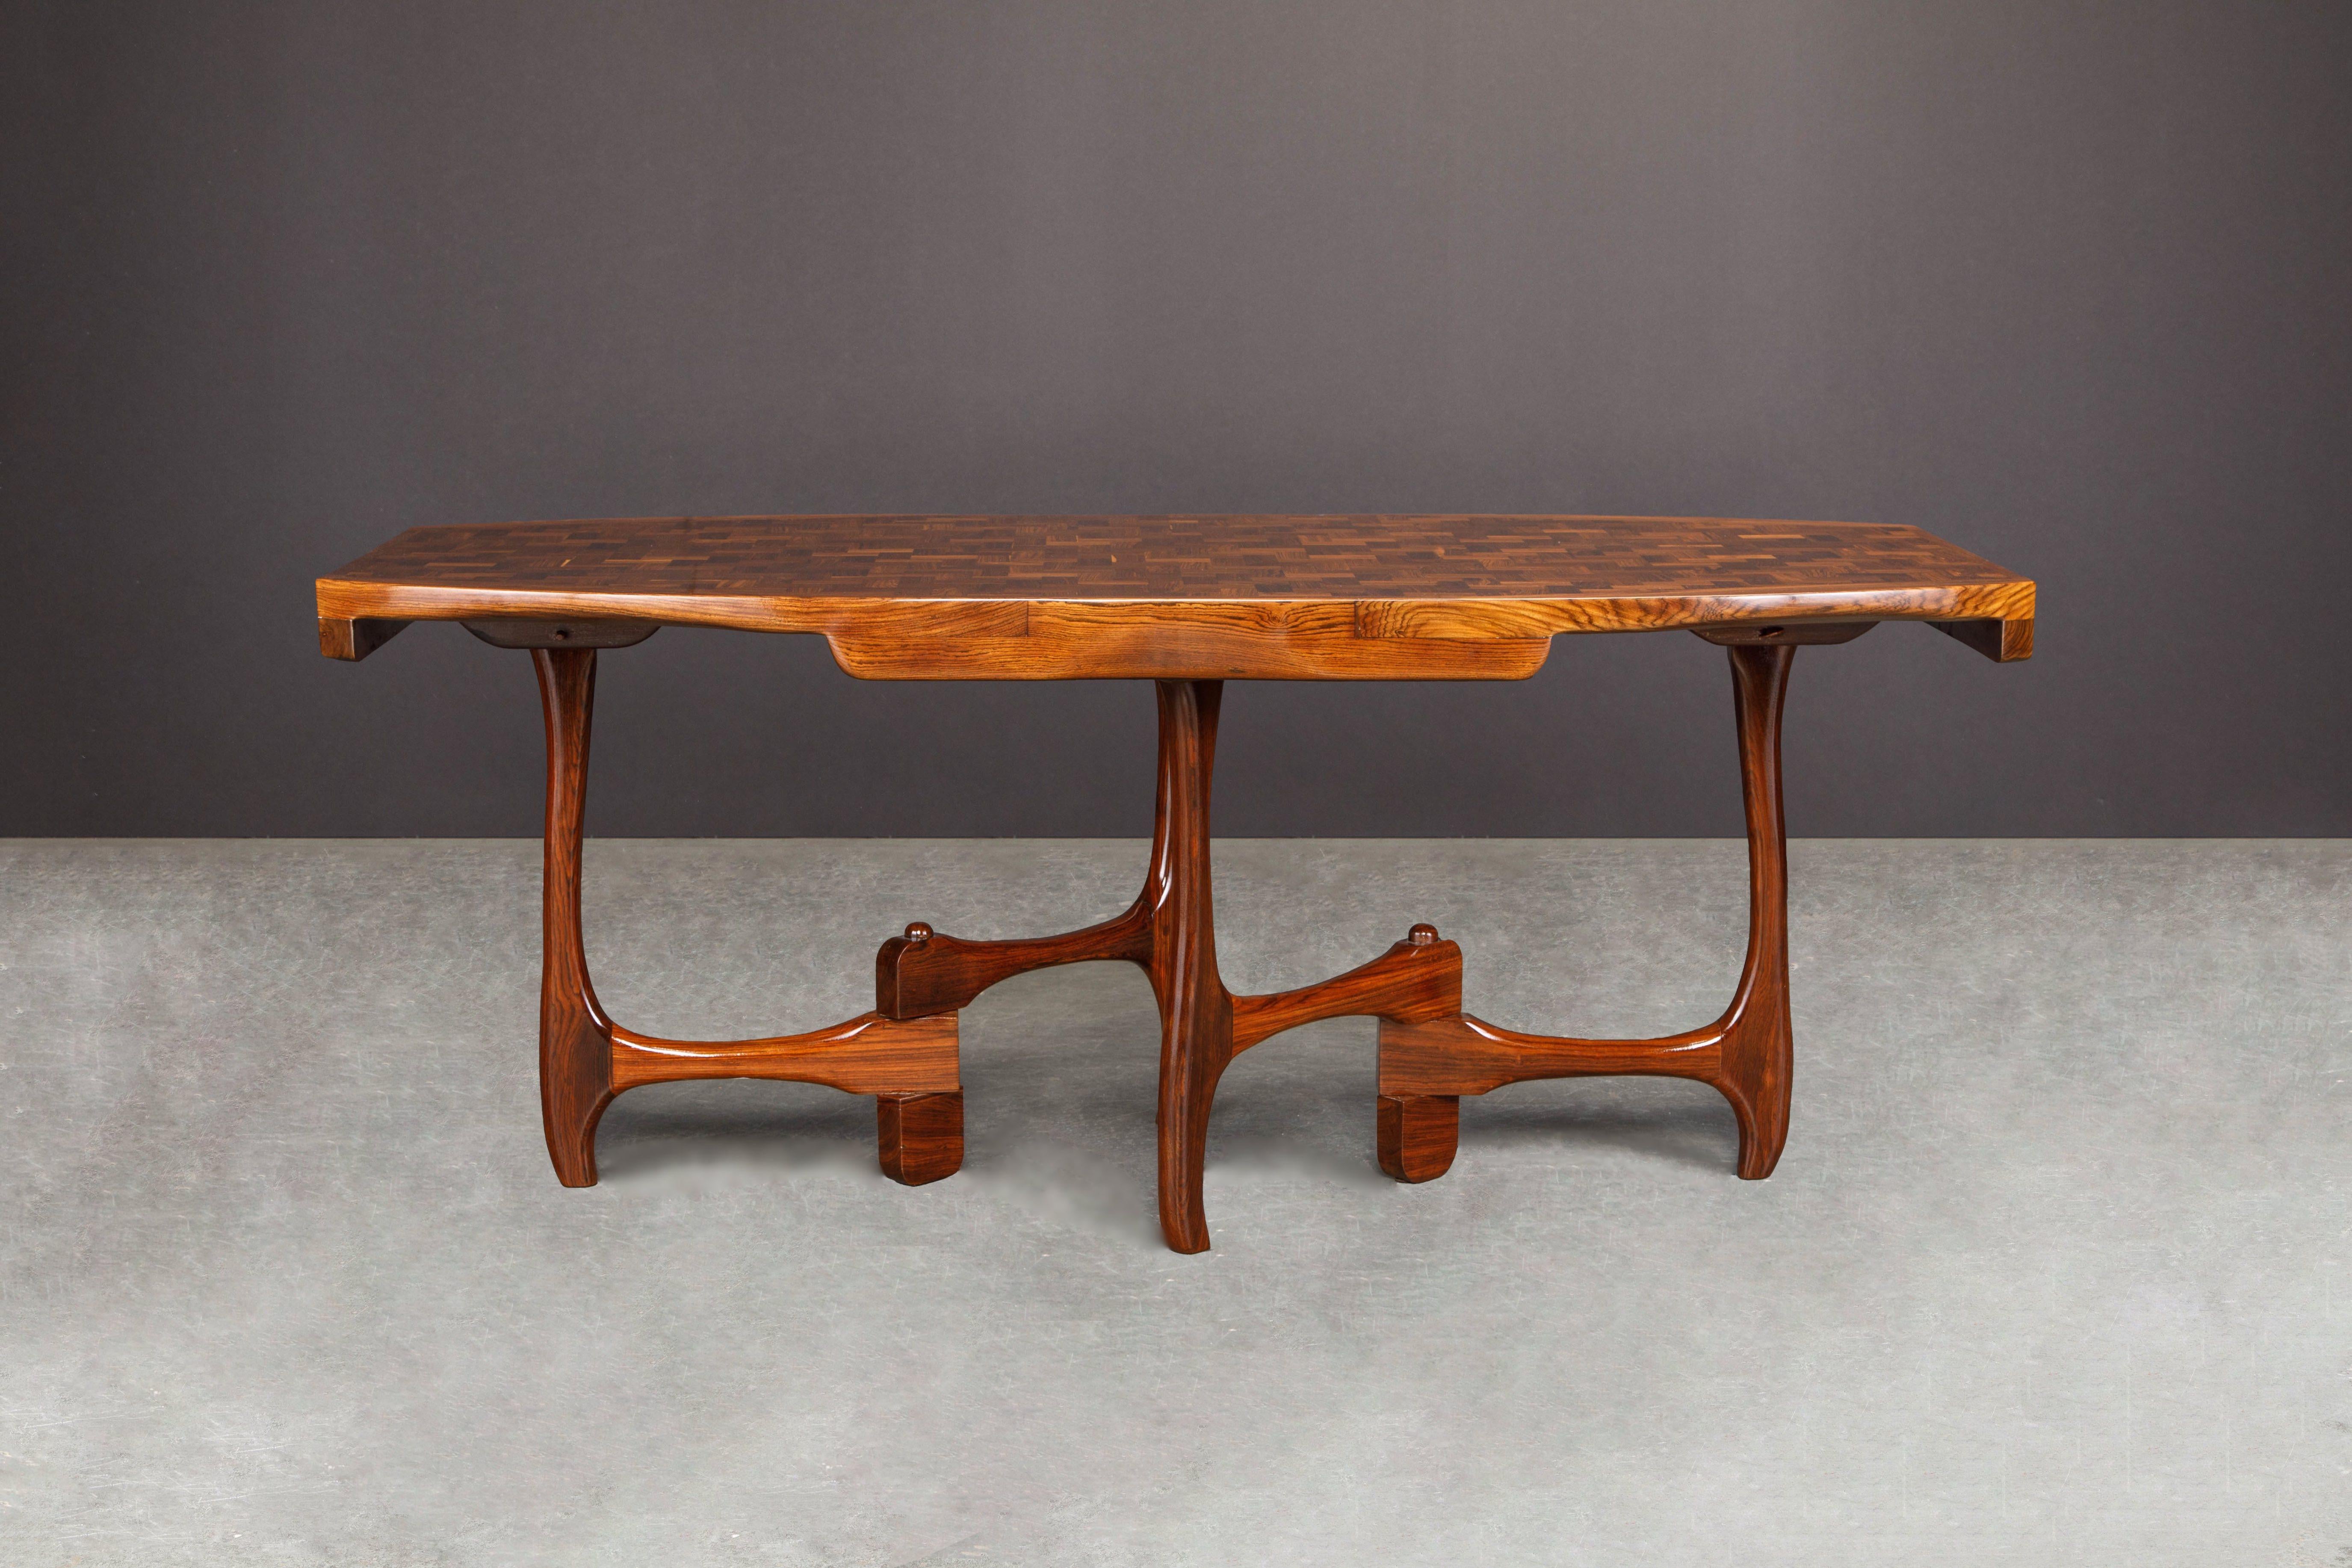 This extremely rare and highly coveted sculptural dining table in exotic Cocobolo Rosewood was designed by leading 1960s modernist designer Don Shoemaker and is signed with a partial Senal S.A. label on the underside. 

We fully restored this